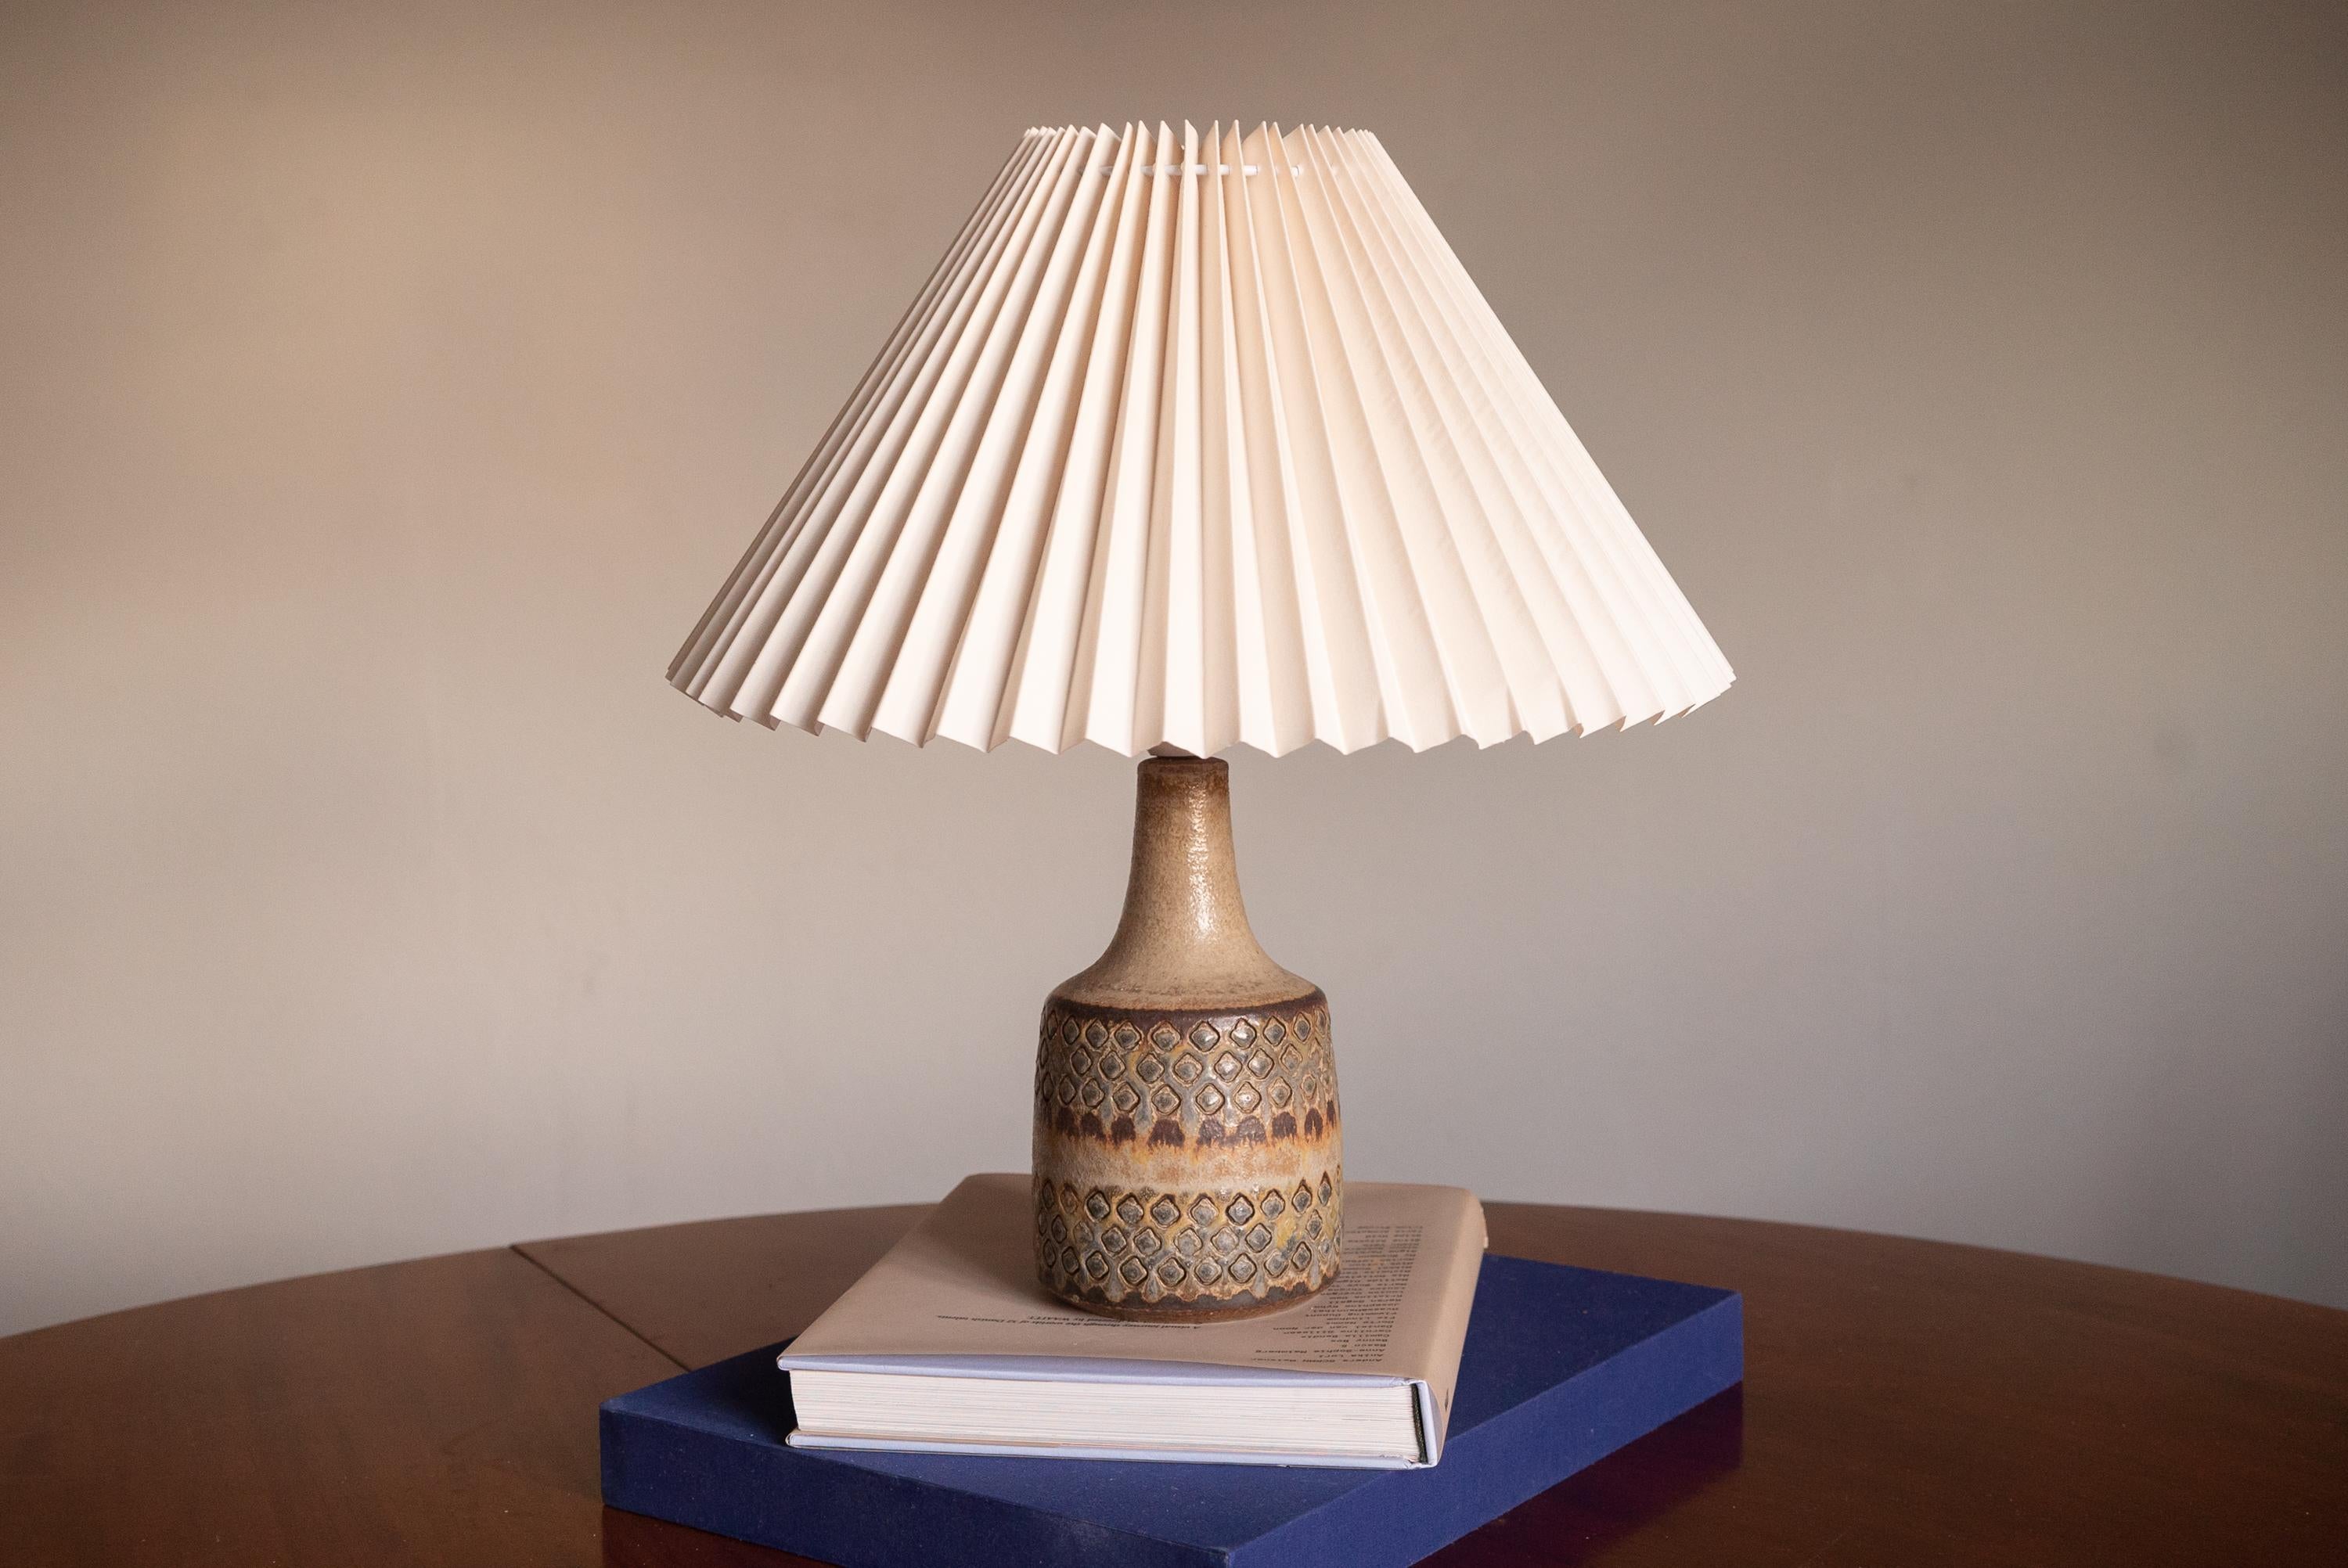 A table lamp produced by Søholm Keramik, located on the island of Bornholm in Denmark. Features a highly artistic glazed and incised decor.

Sold without lampshade. Stated dimensions exclude the lampshade. Height includes socket.